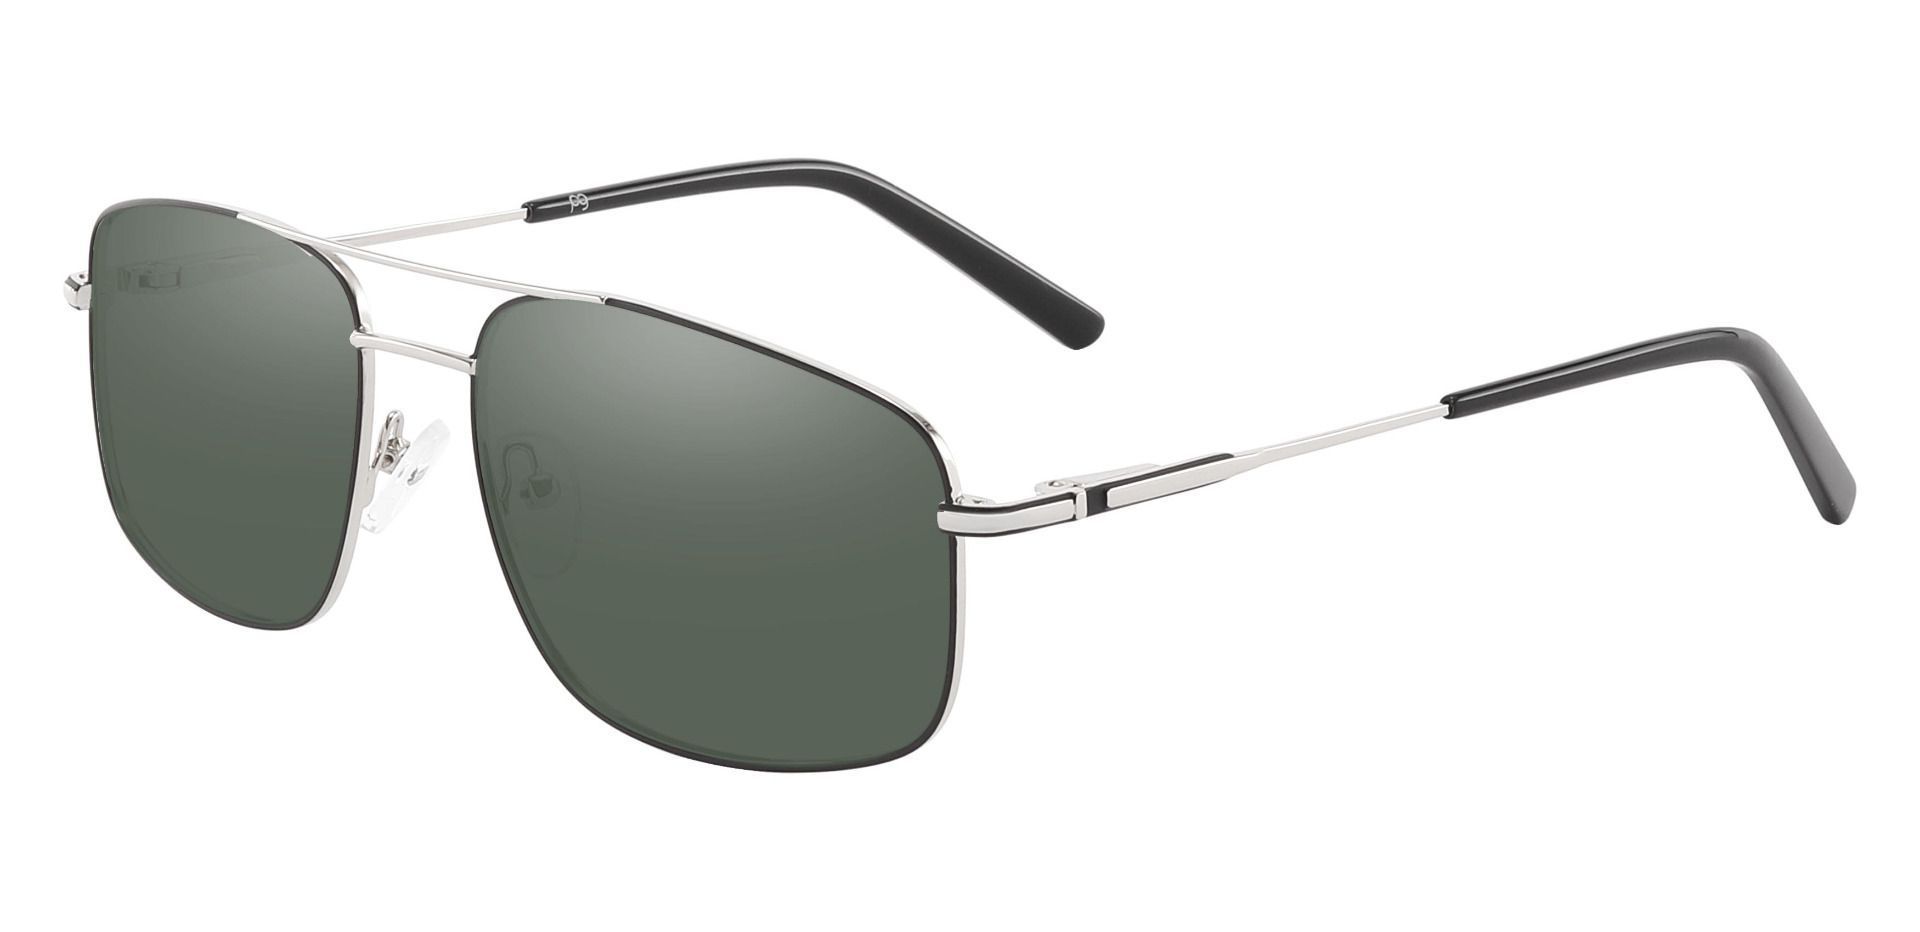 Turner Aviator Lined Bifocal Sunglasses - Silver Frame With Green Lenses